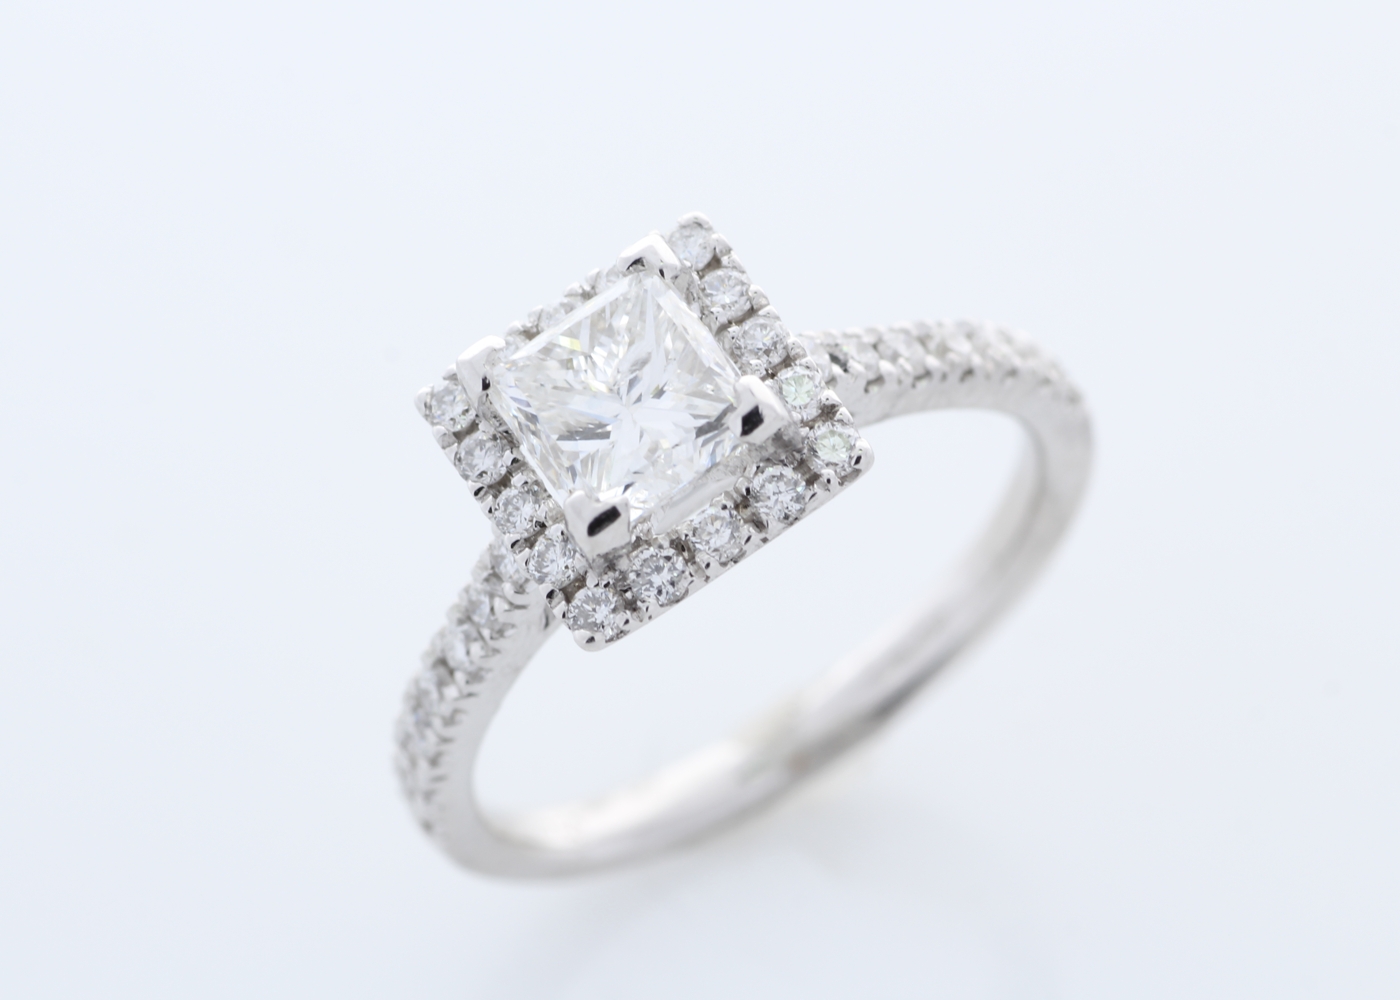 18ct White Gold Princess Cut With Halo Shoulders Diamond Ring (1.00) 1.36 Carats - Image 5 of 6